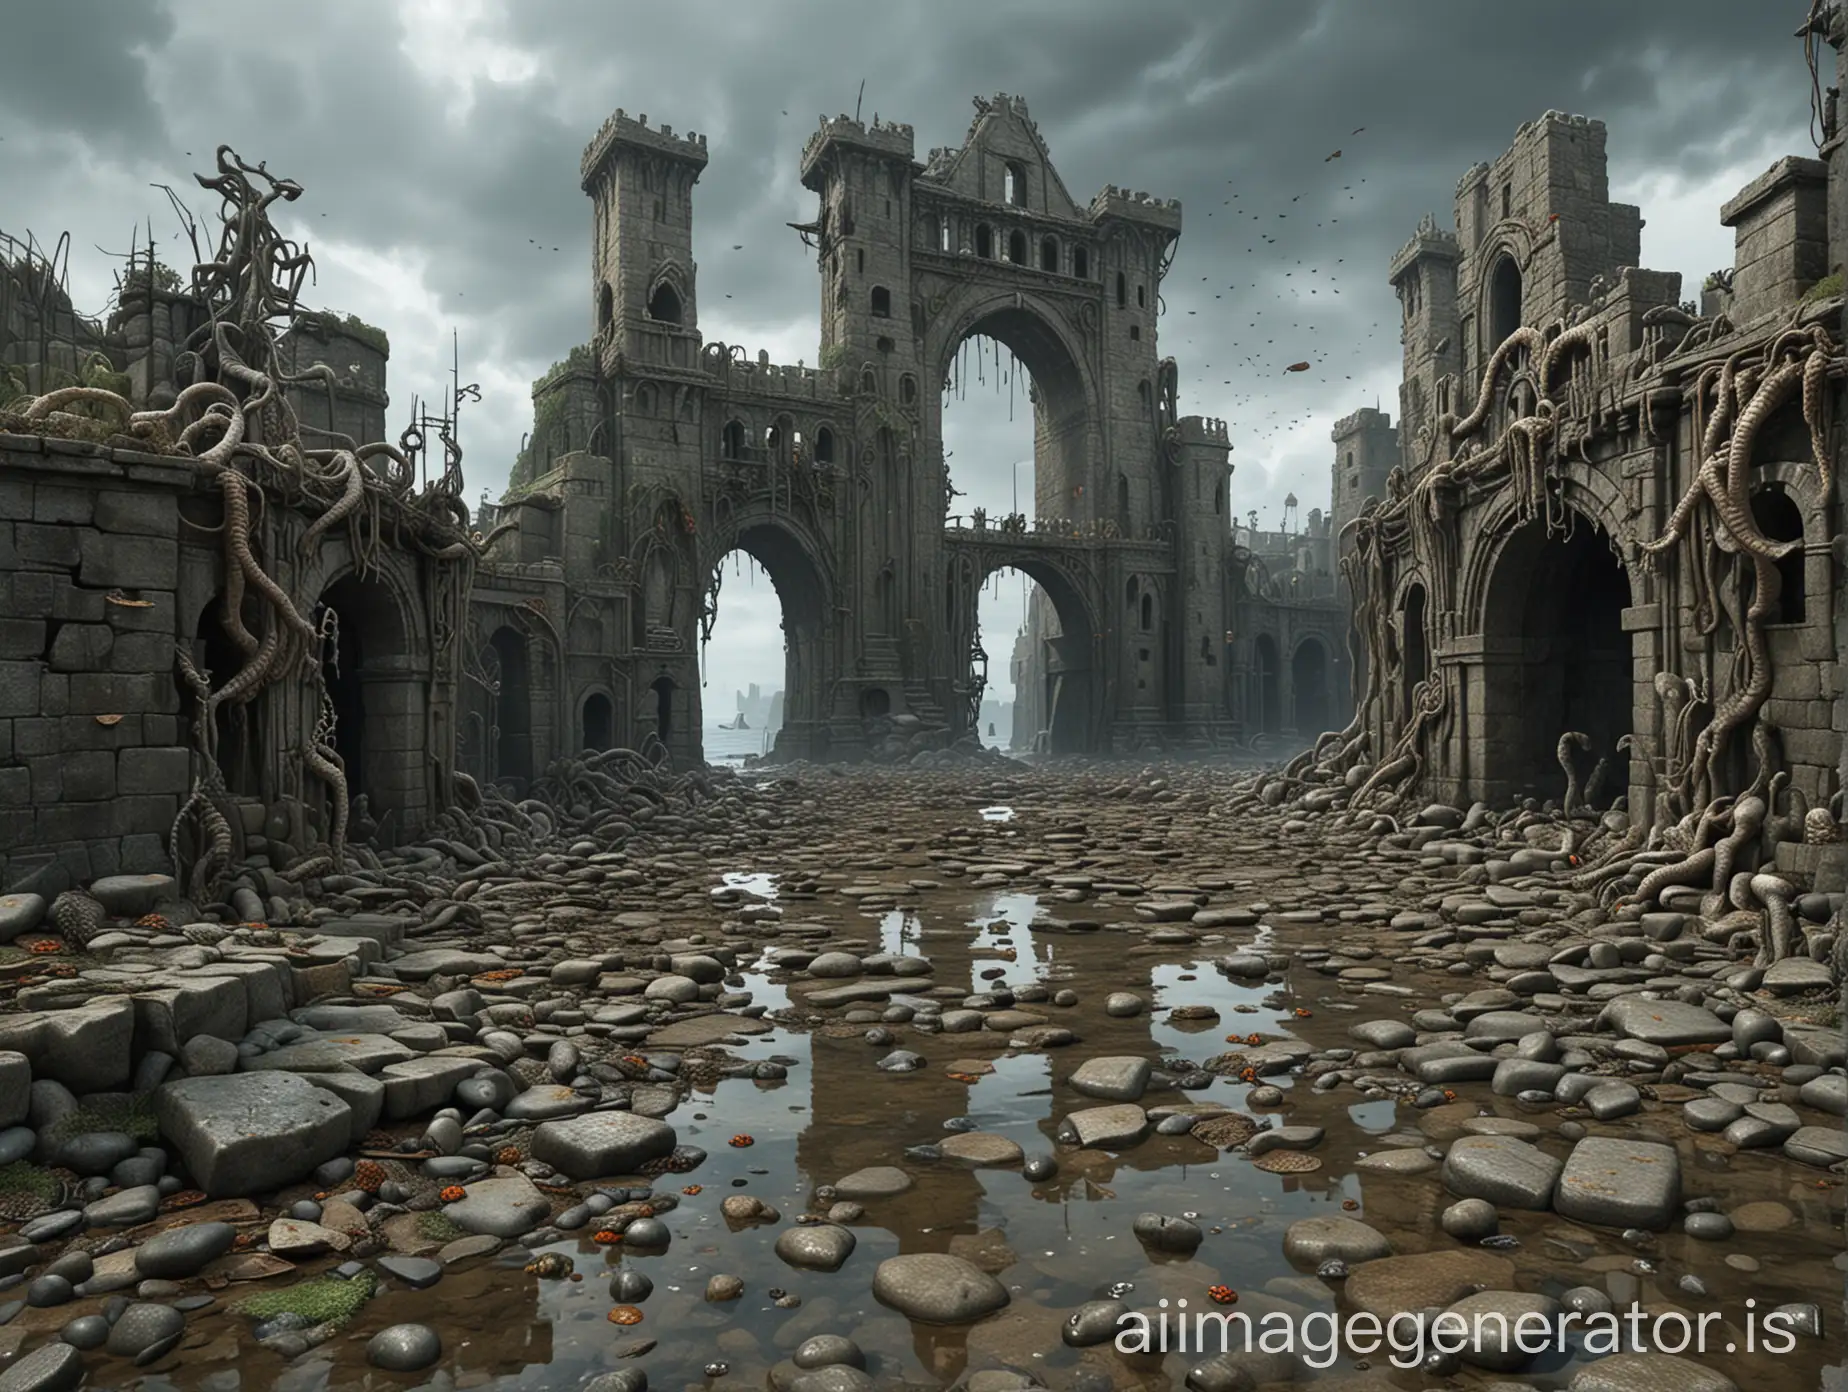 Eerie-Cityscape-with-Stone-Gate-and-Tentacled-Structures